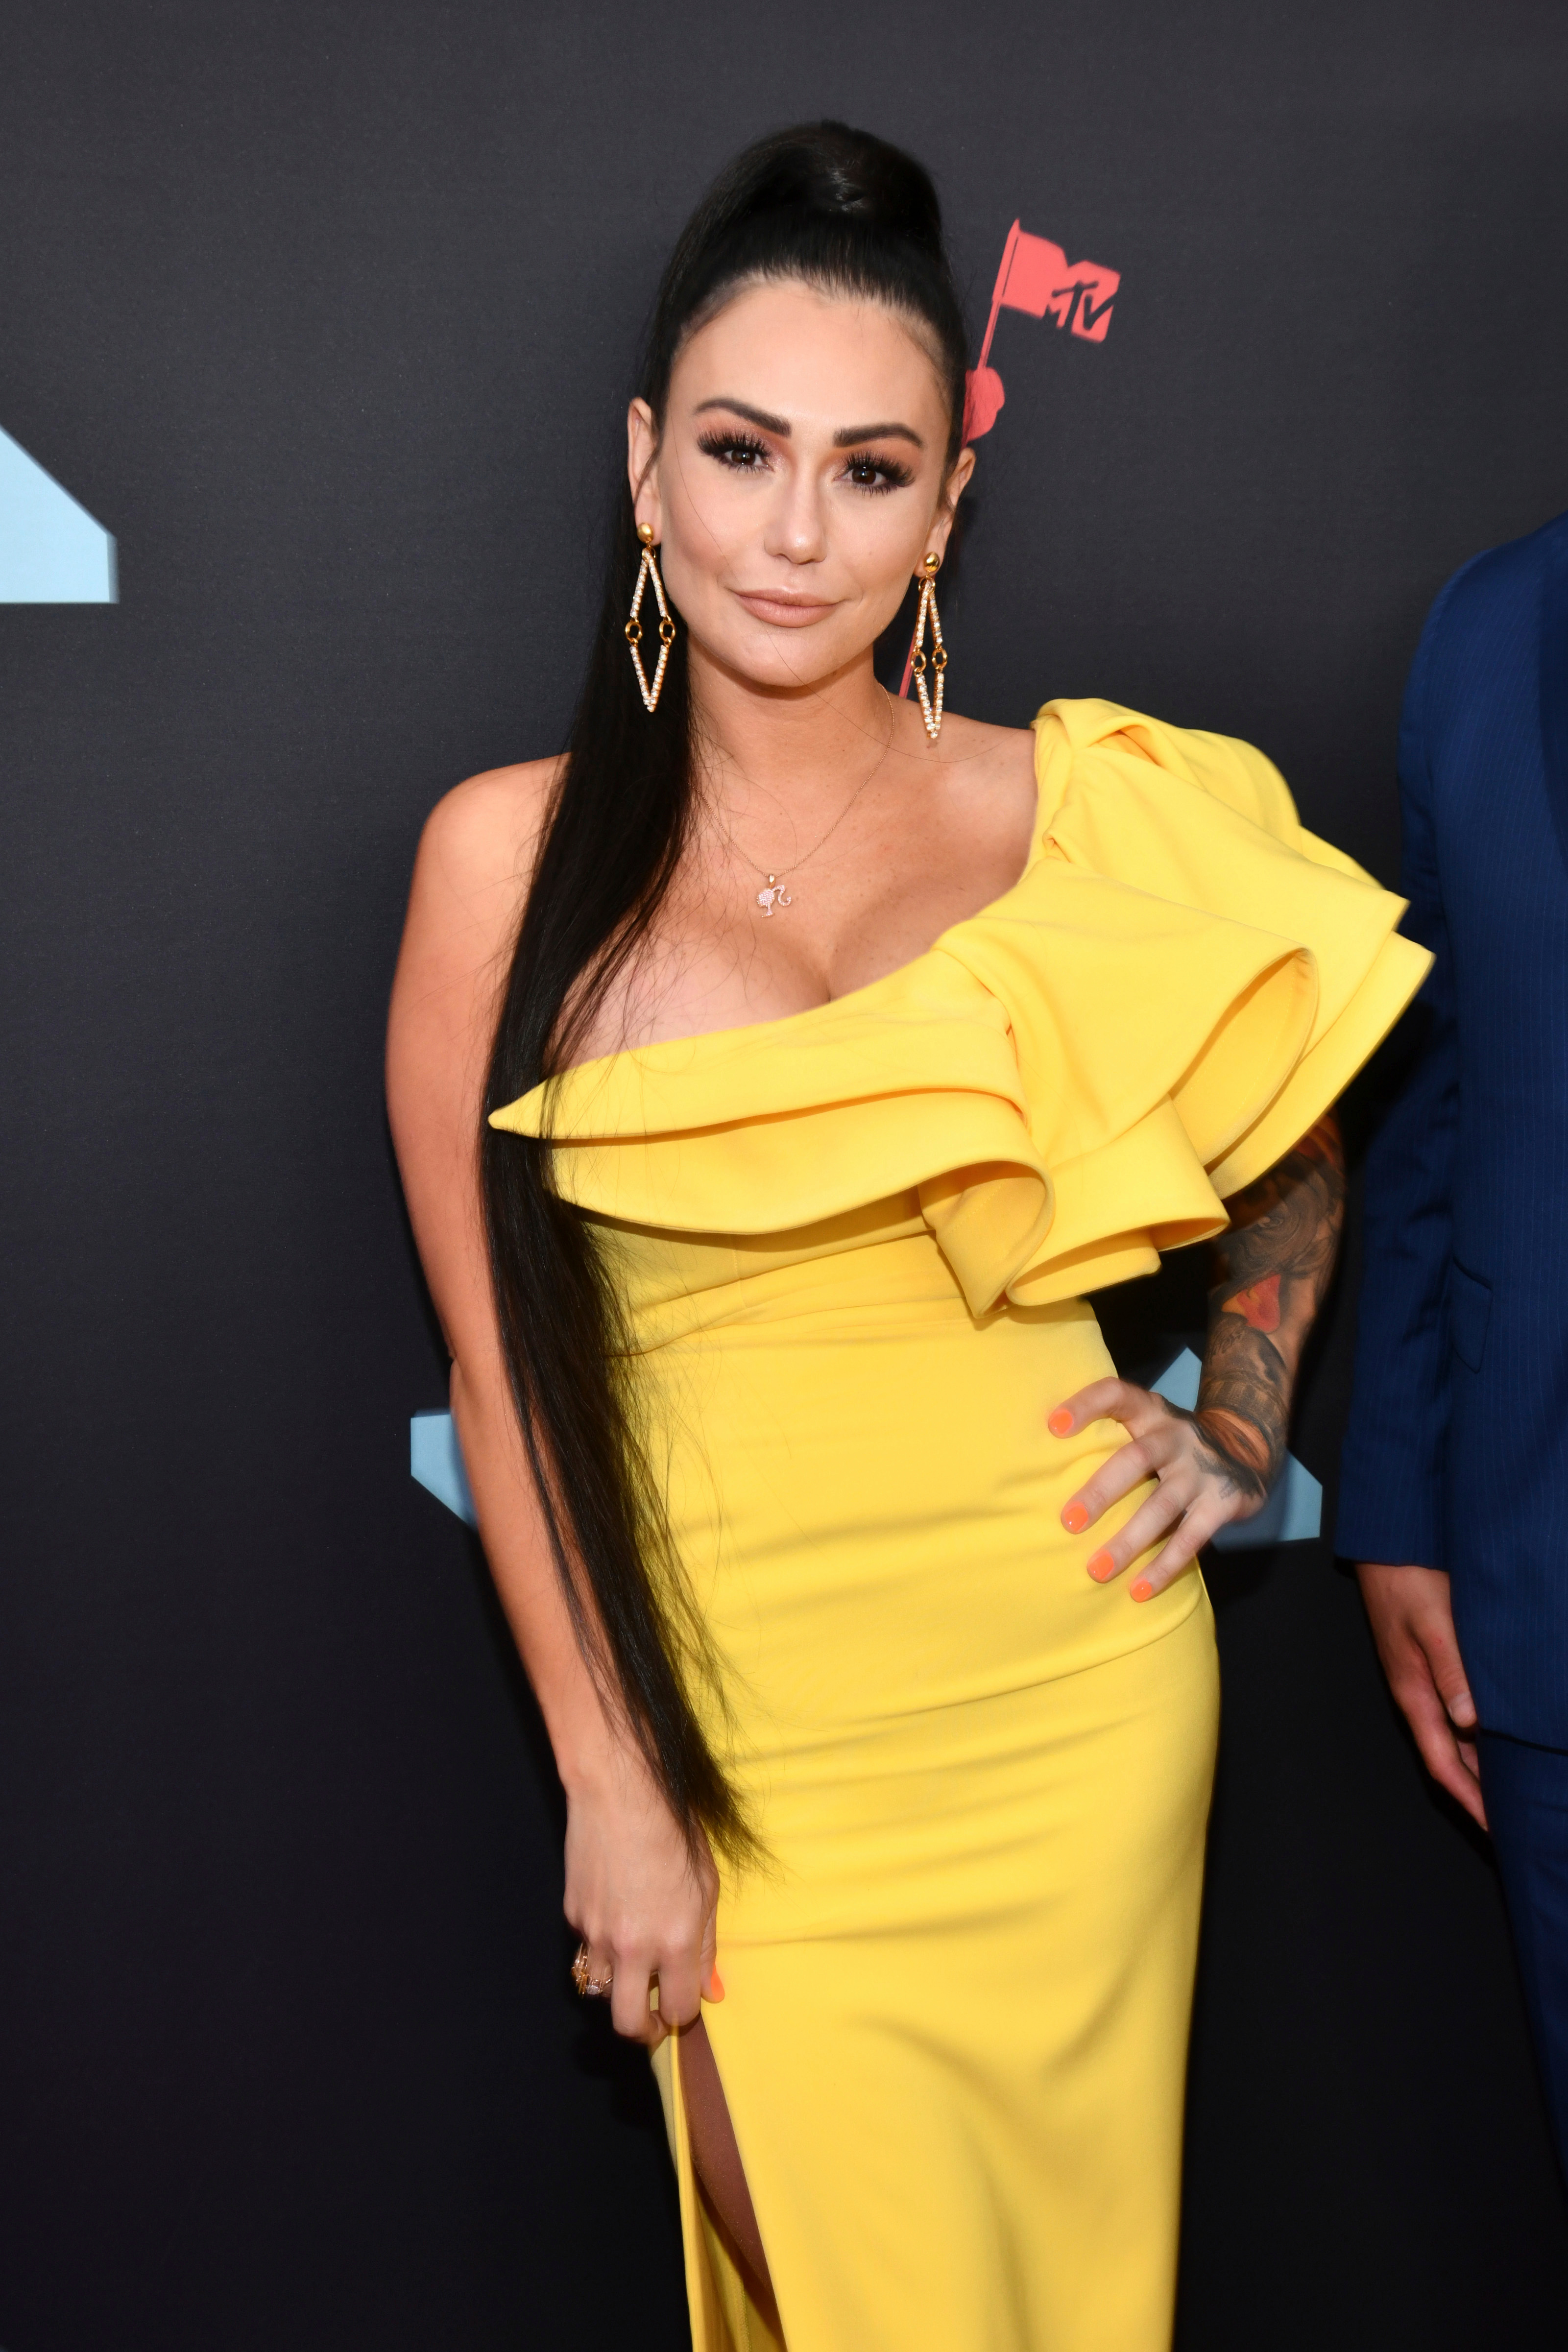 Jenni JWoww Farley Opens Up About Her Second Boob Job